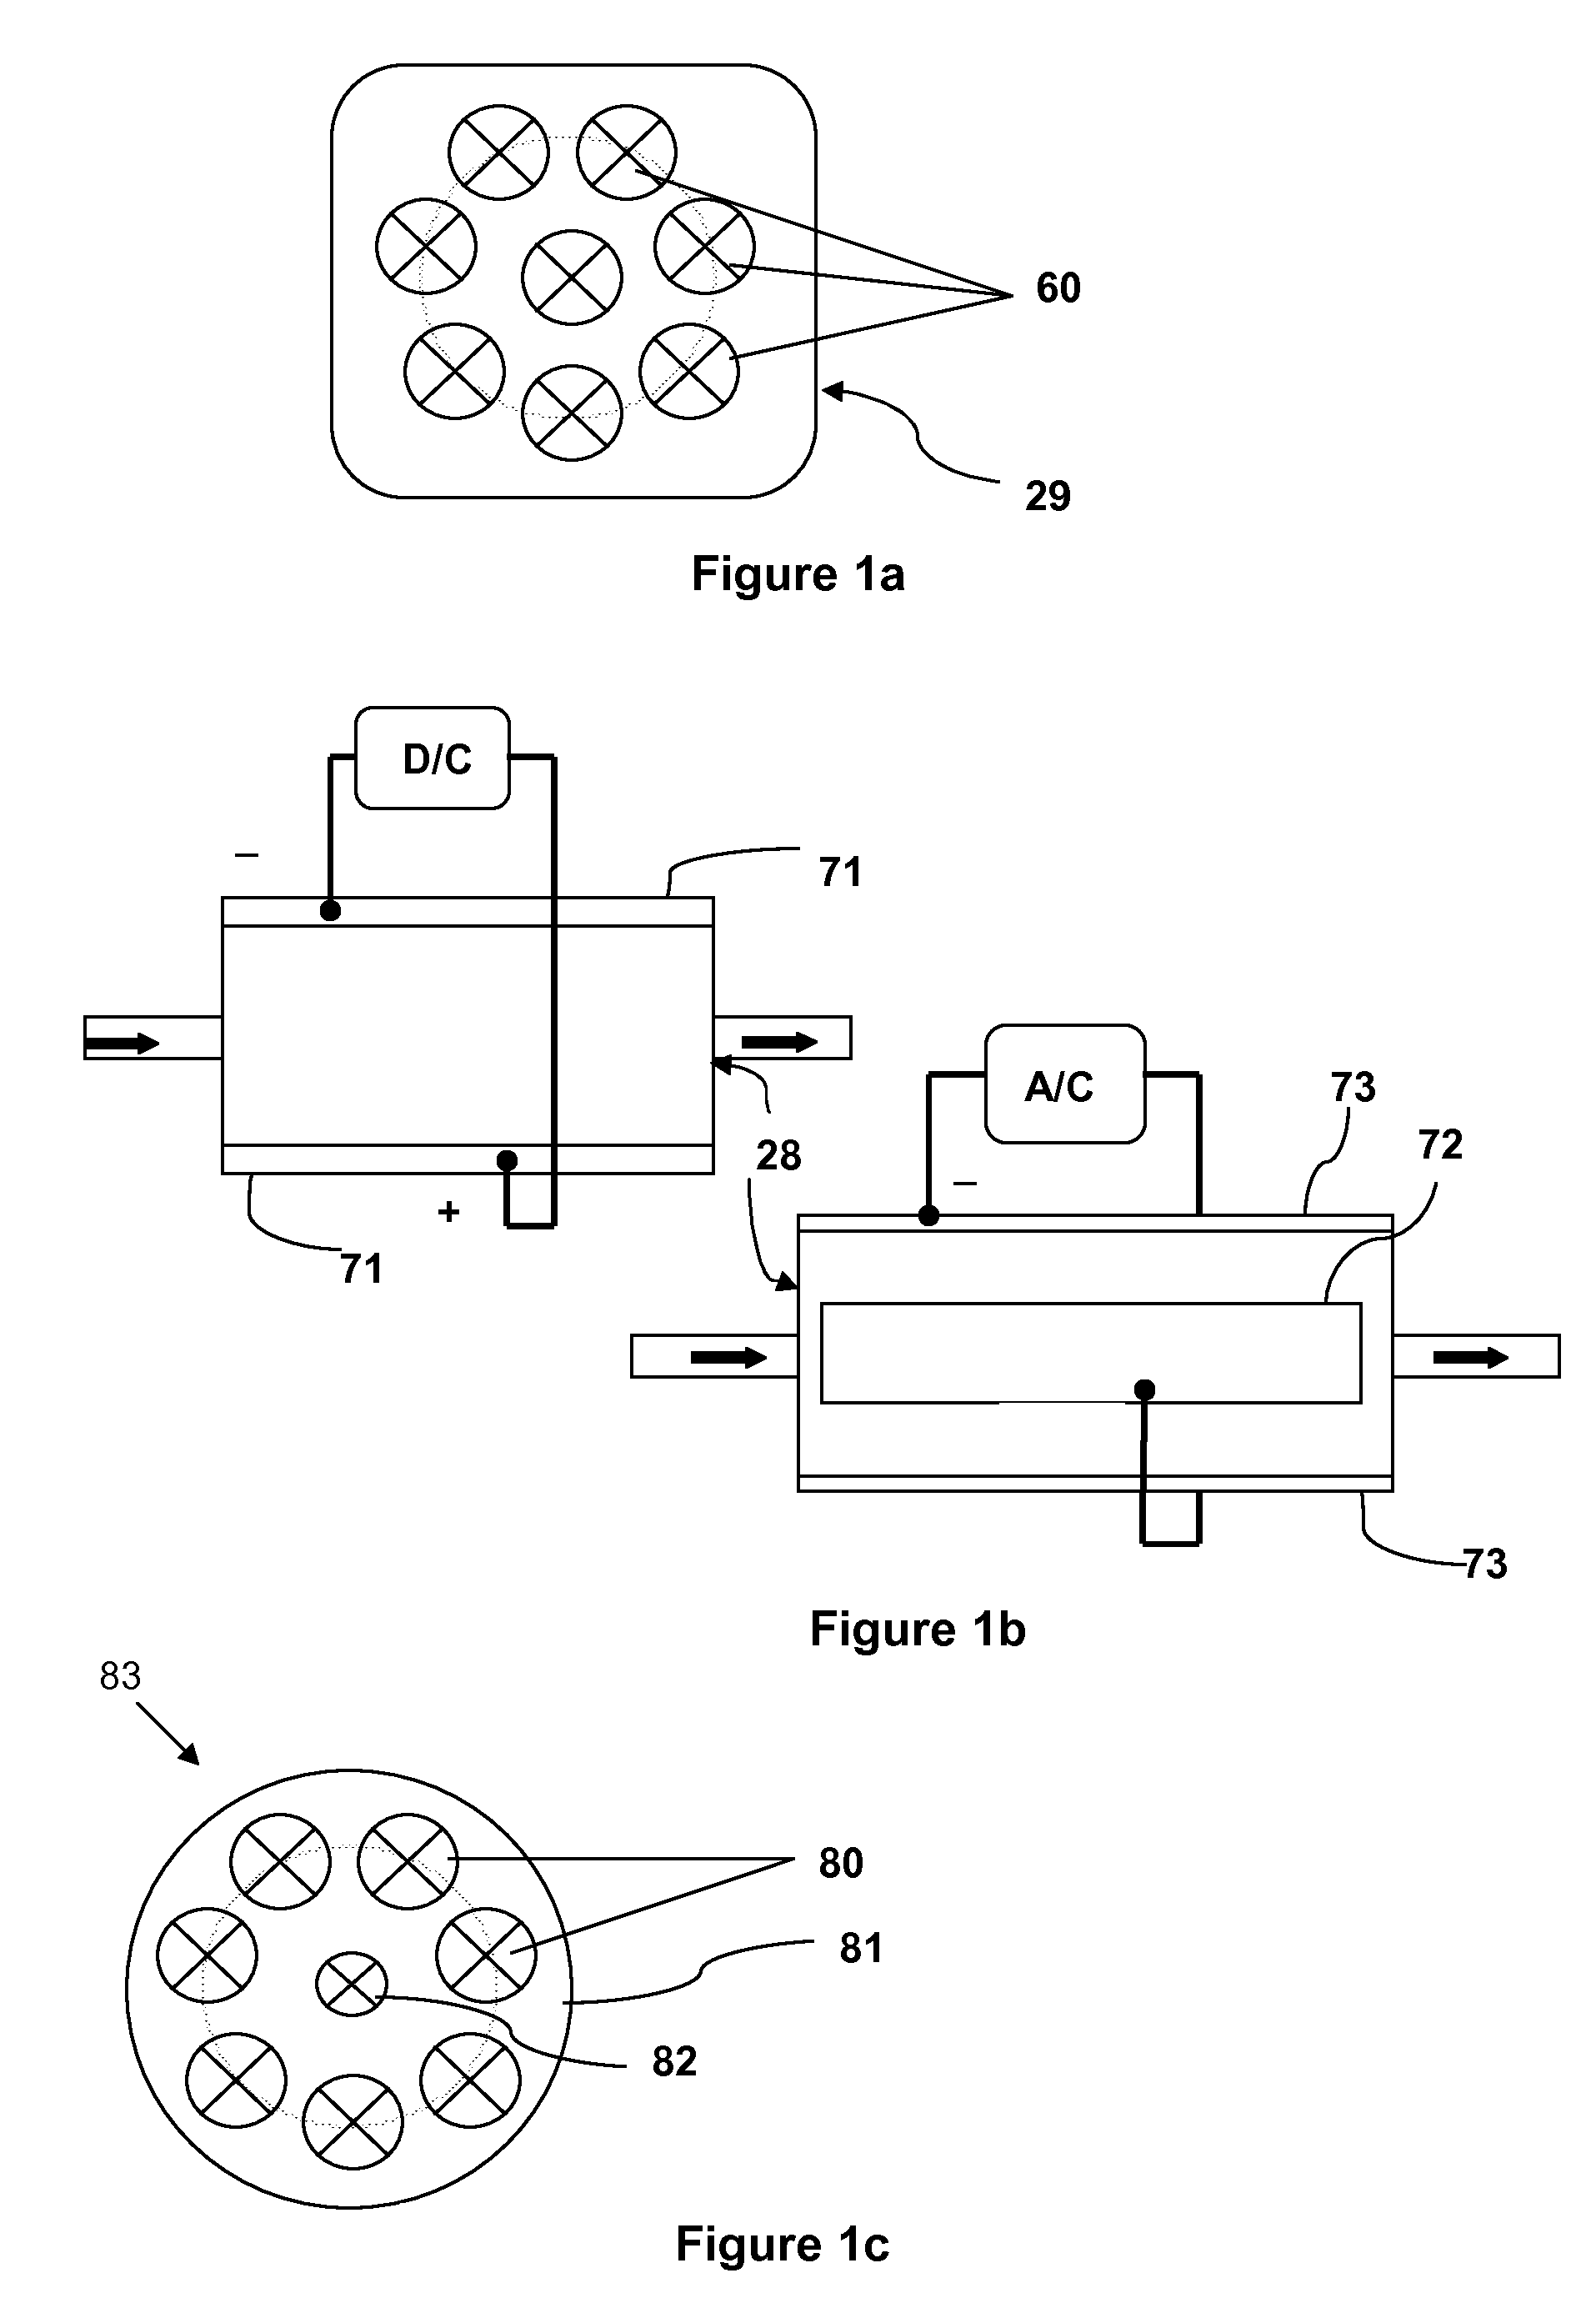 Aqueous treatment apparatus utilizing precursor materials and ultrasonics to generate customized oxidation-reduction-reactant chemistry environments in electrochemical cells and/or similar devices